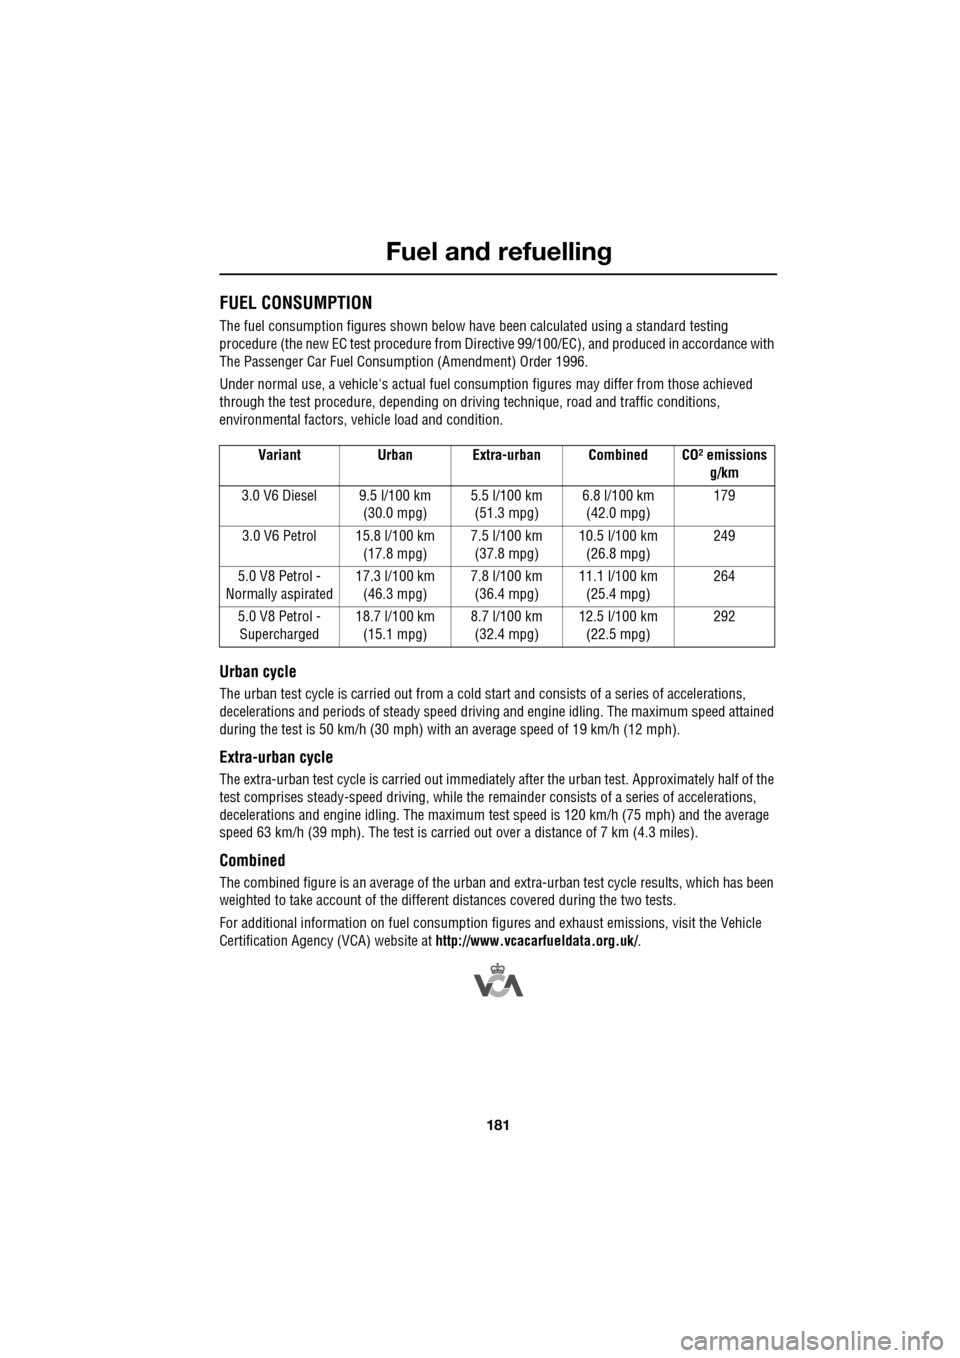 JAGUAR XF 2009 1.G Owners Manual 181
Fuel and refuelling
               
FUEL CONSUMPTION
The fuel consumption figures shown below have been calculated using a standard testing 
procedure (the new EC test proc edure from Directive 99